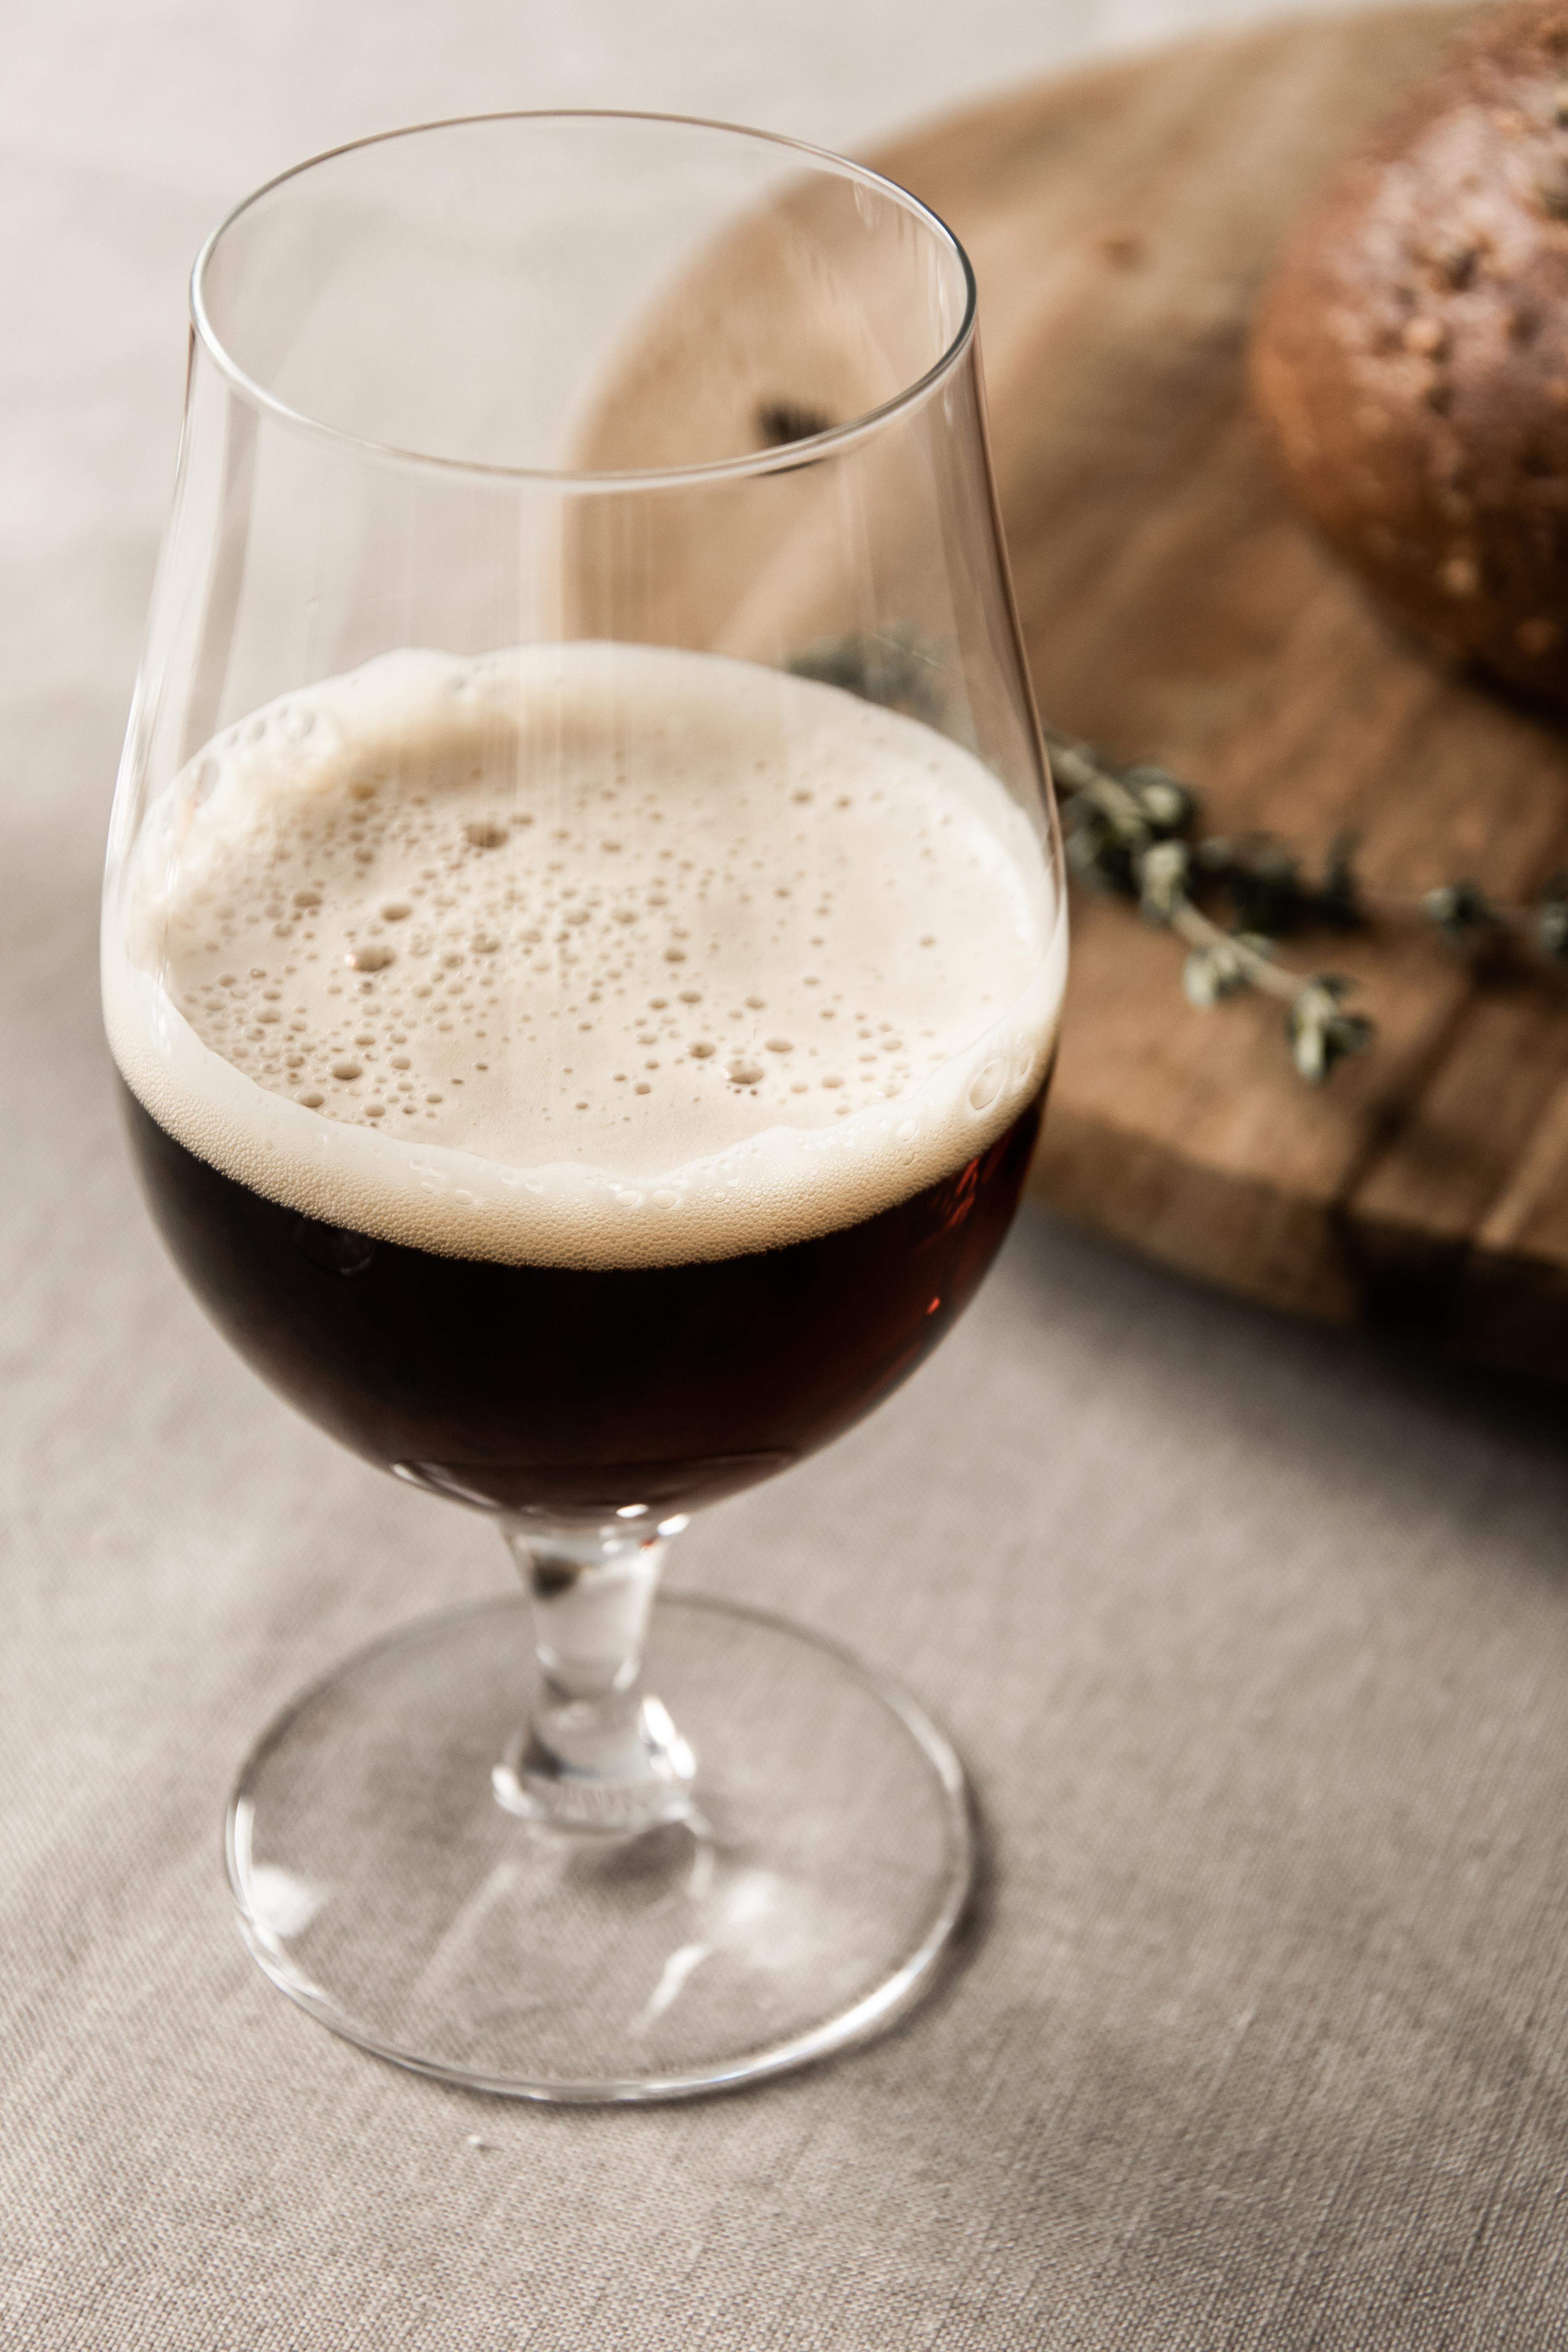 Beer Taster from Orrefors holds 16 oz and has a round shape in a classic beer-taster design. The beer glass is outstanding for full-bodied beers, as well as flavorful varieties such as Belgian Trappist beers, stouts, and IPAs. Designed by Erika